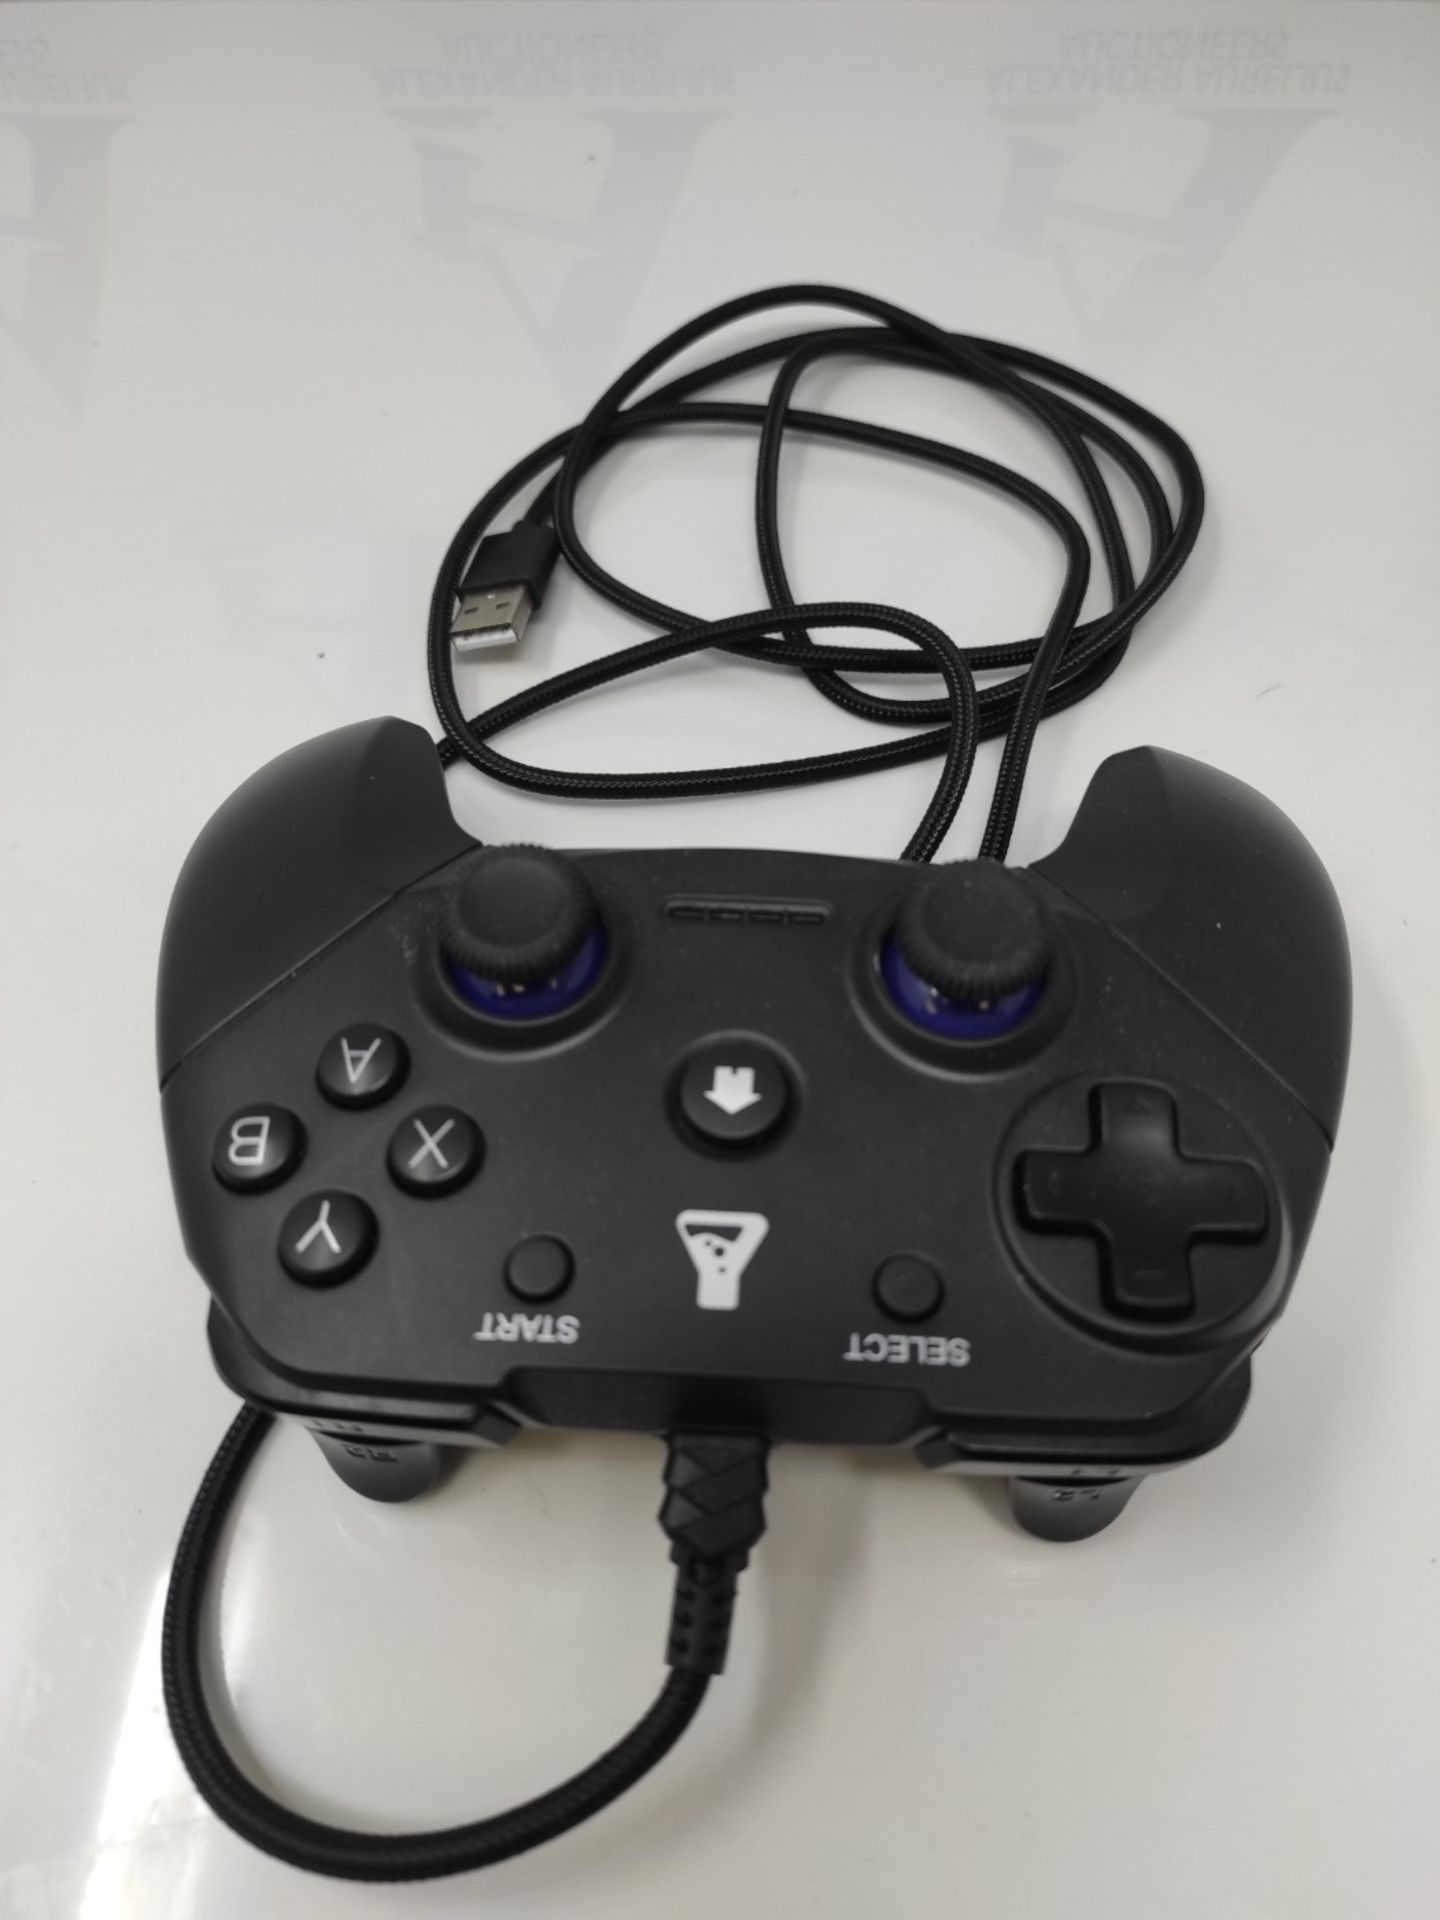 THE G-LAB K-Pad Thorium Game Controller for PC and Ps3 USB with Cable - Integrated Vib - Image 4 of 4